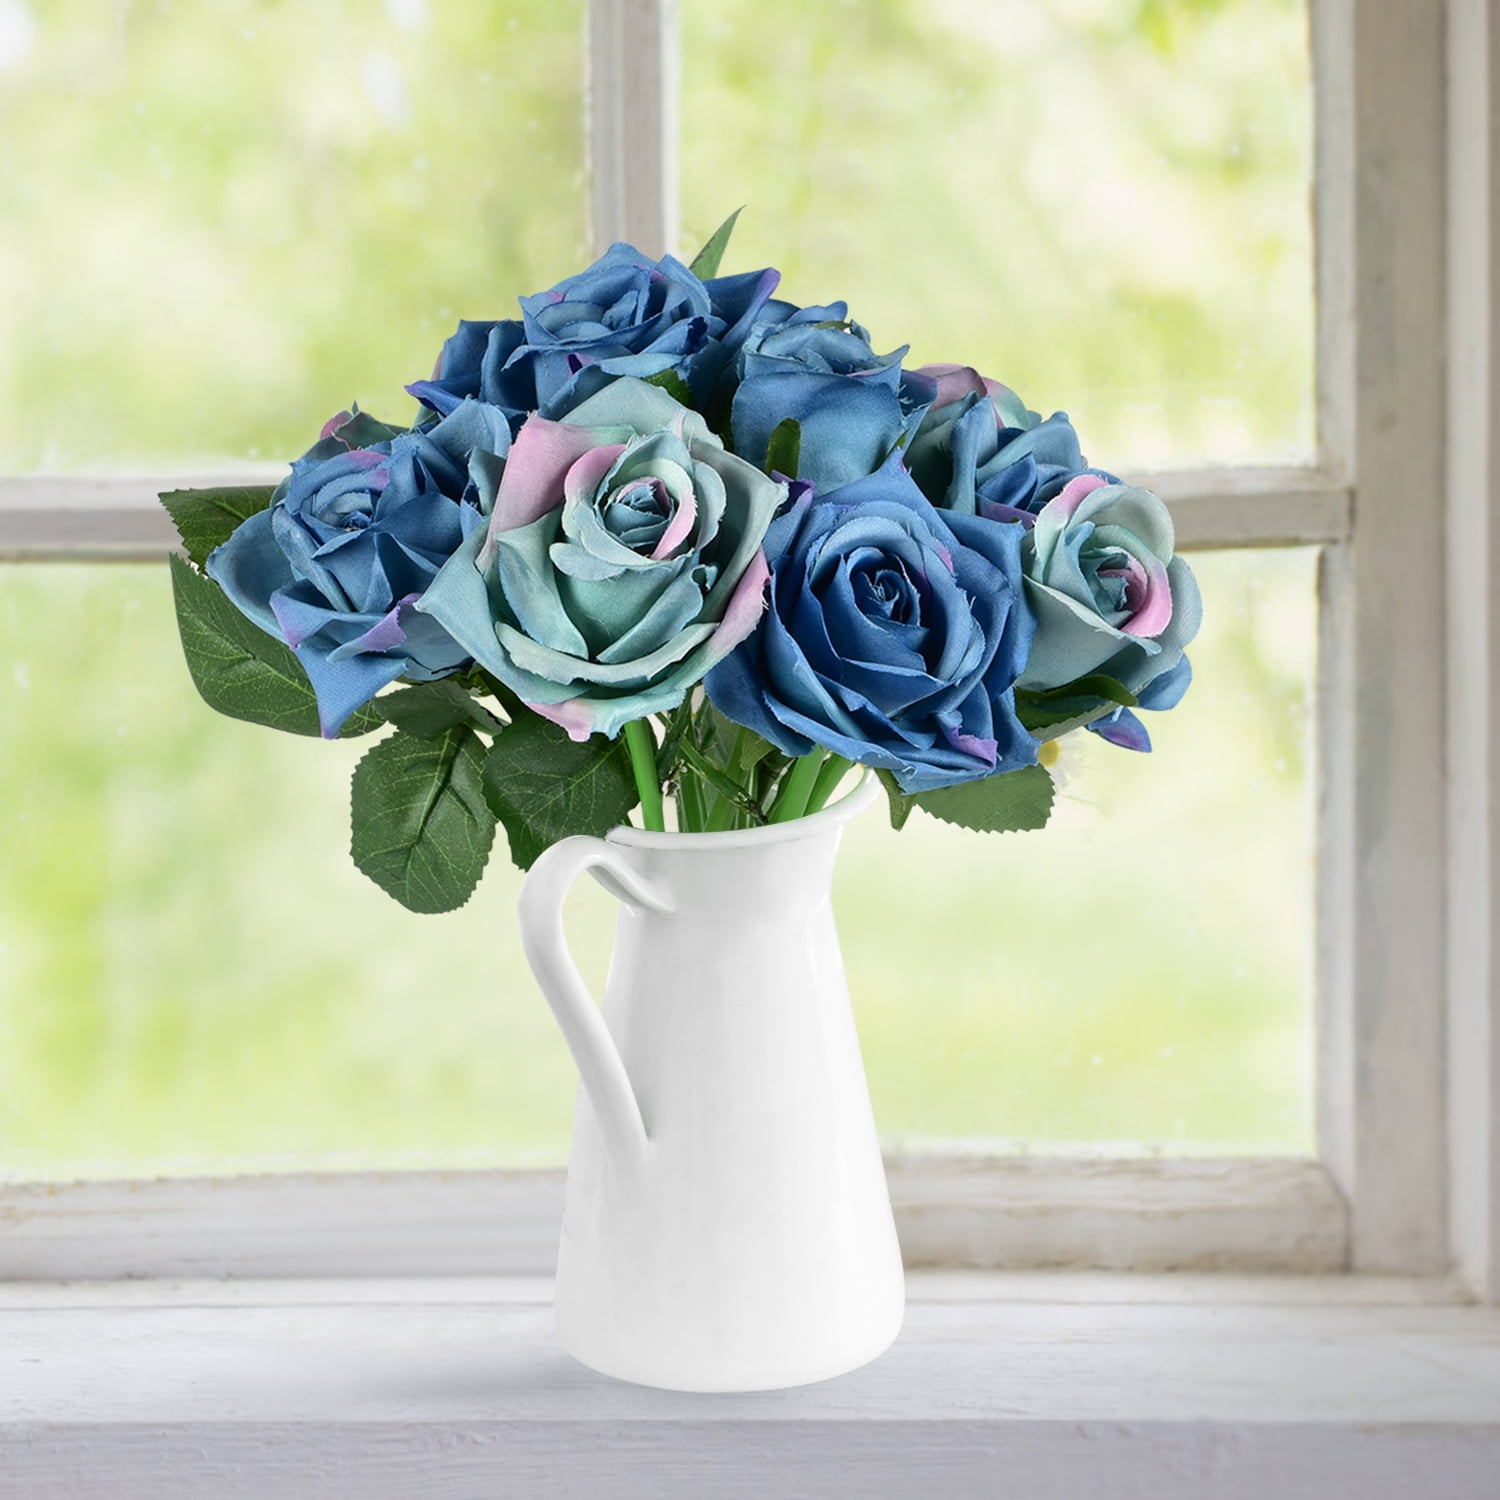 Silk Roses Flower Artificial Rose Decoration Faux Rose Flowers Blooming with Rose Bud and Greenery Perfect for Wedding Home Office Table Centerpieces DIY Flower Arrangement Fake Blue Roses-1 Pack 